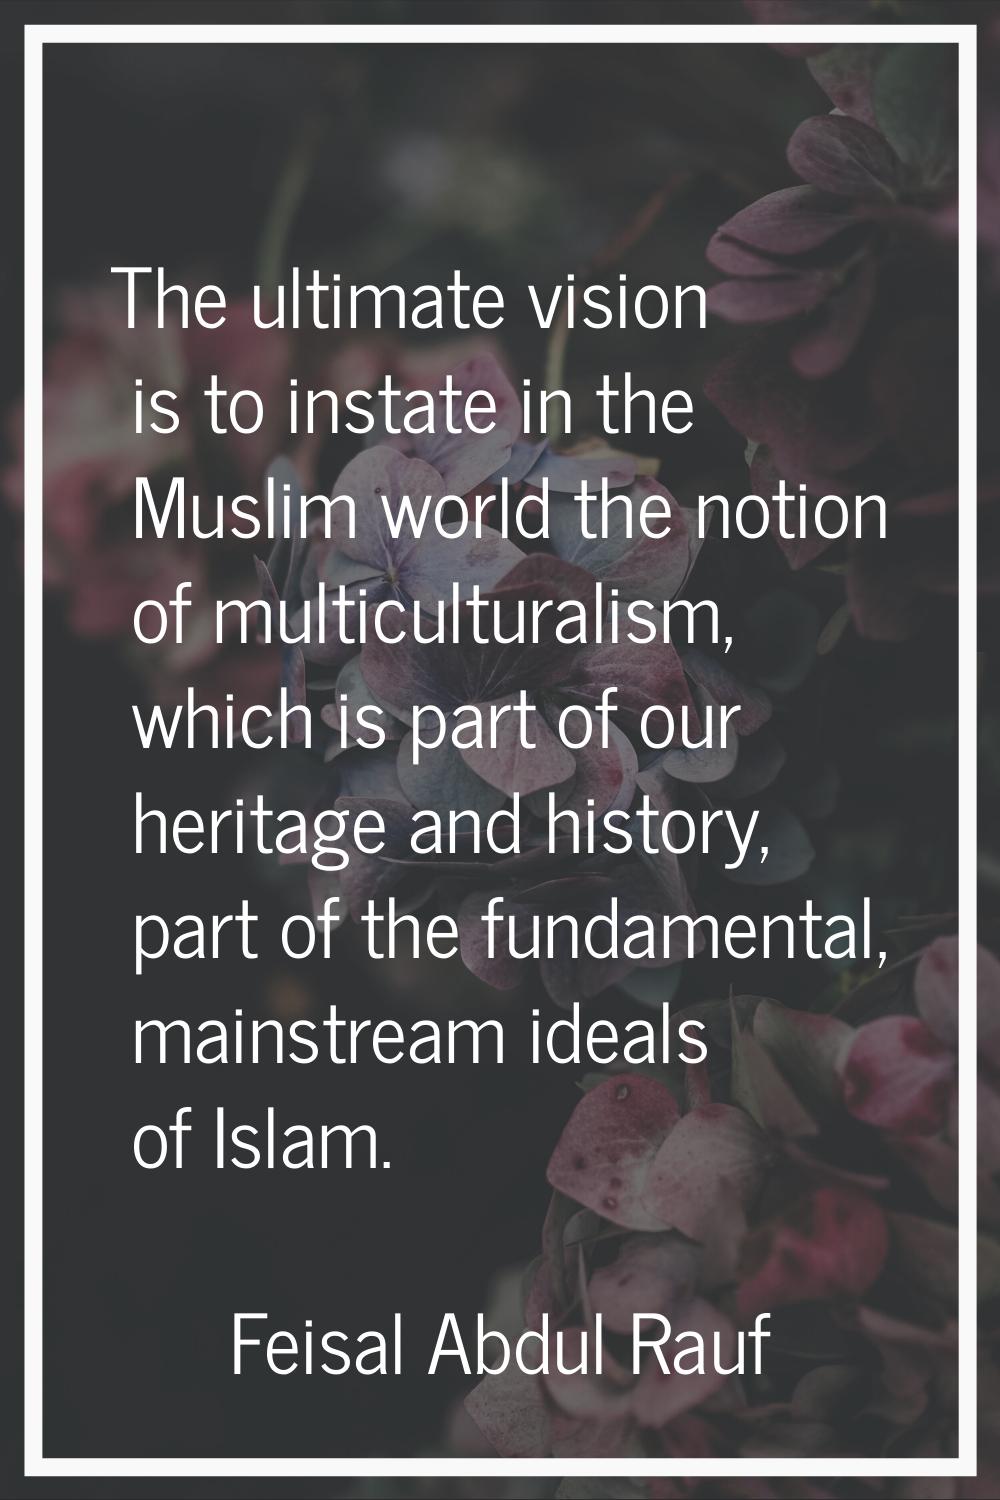 The ultimate vision is to instate in the Muslim world the notion of multiculturalism, which is part